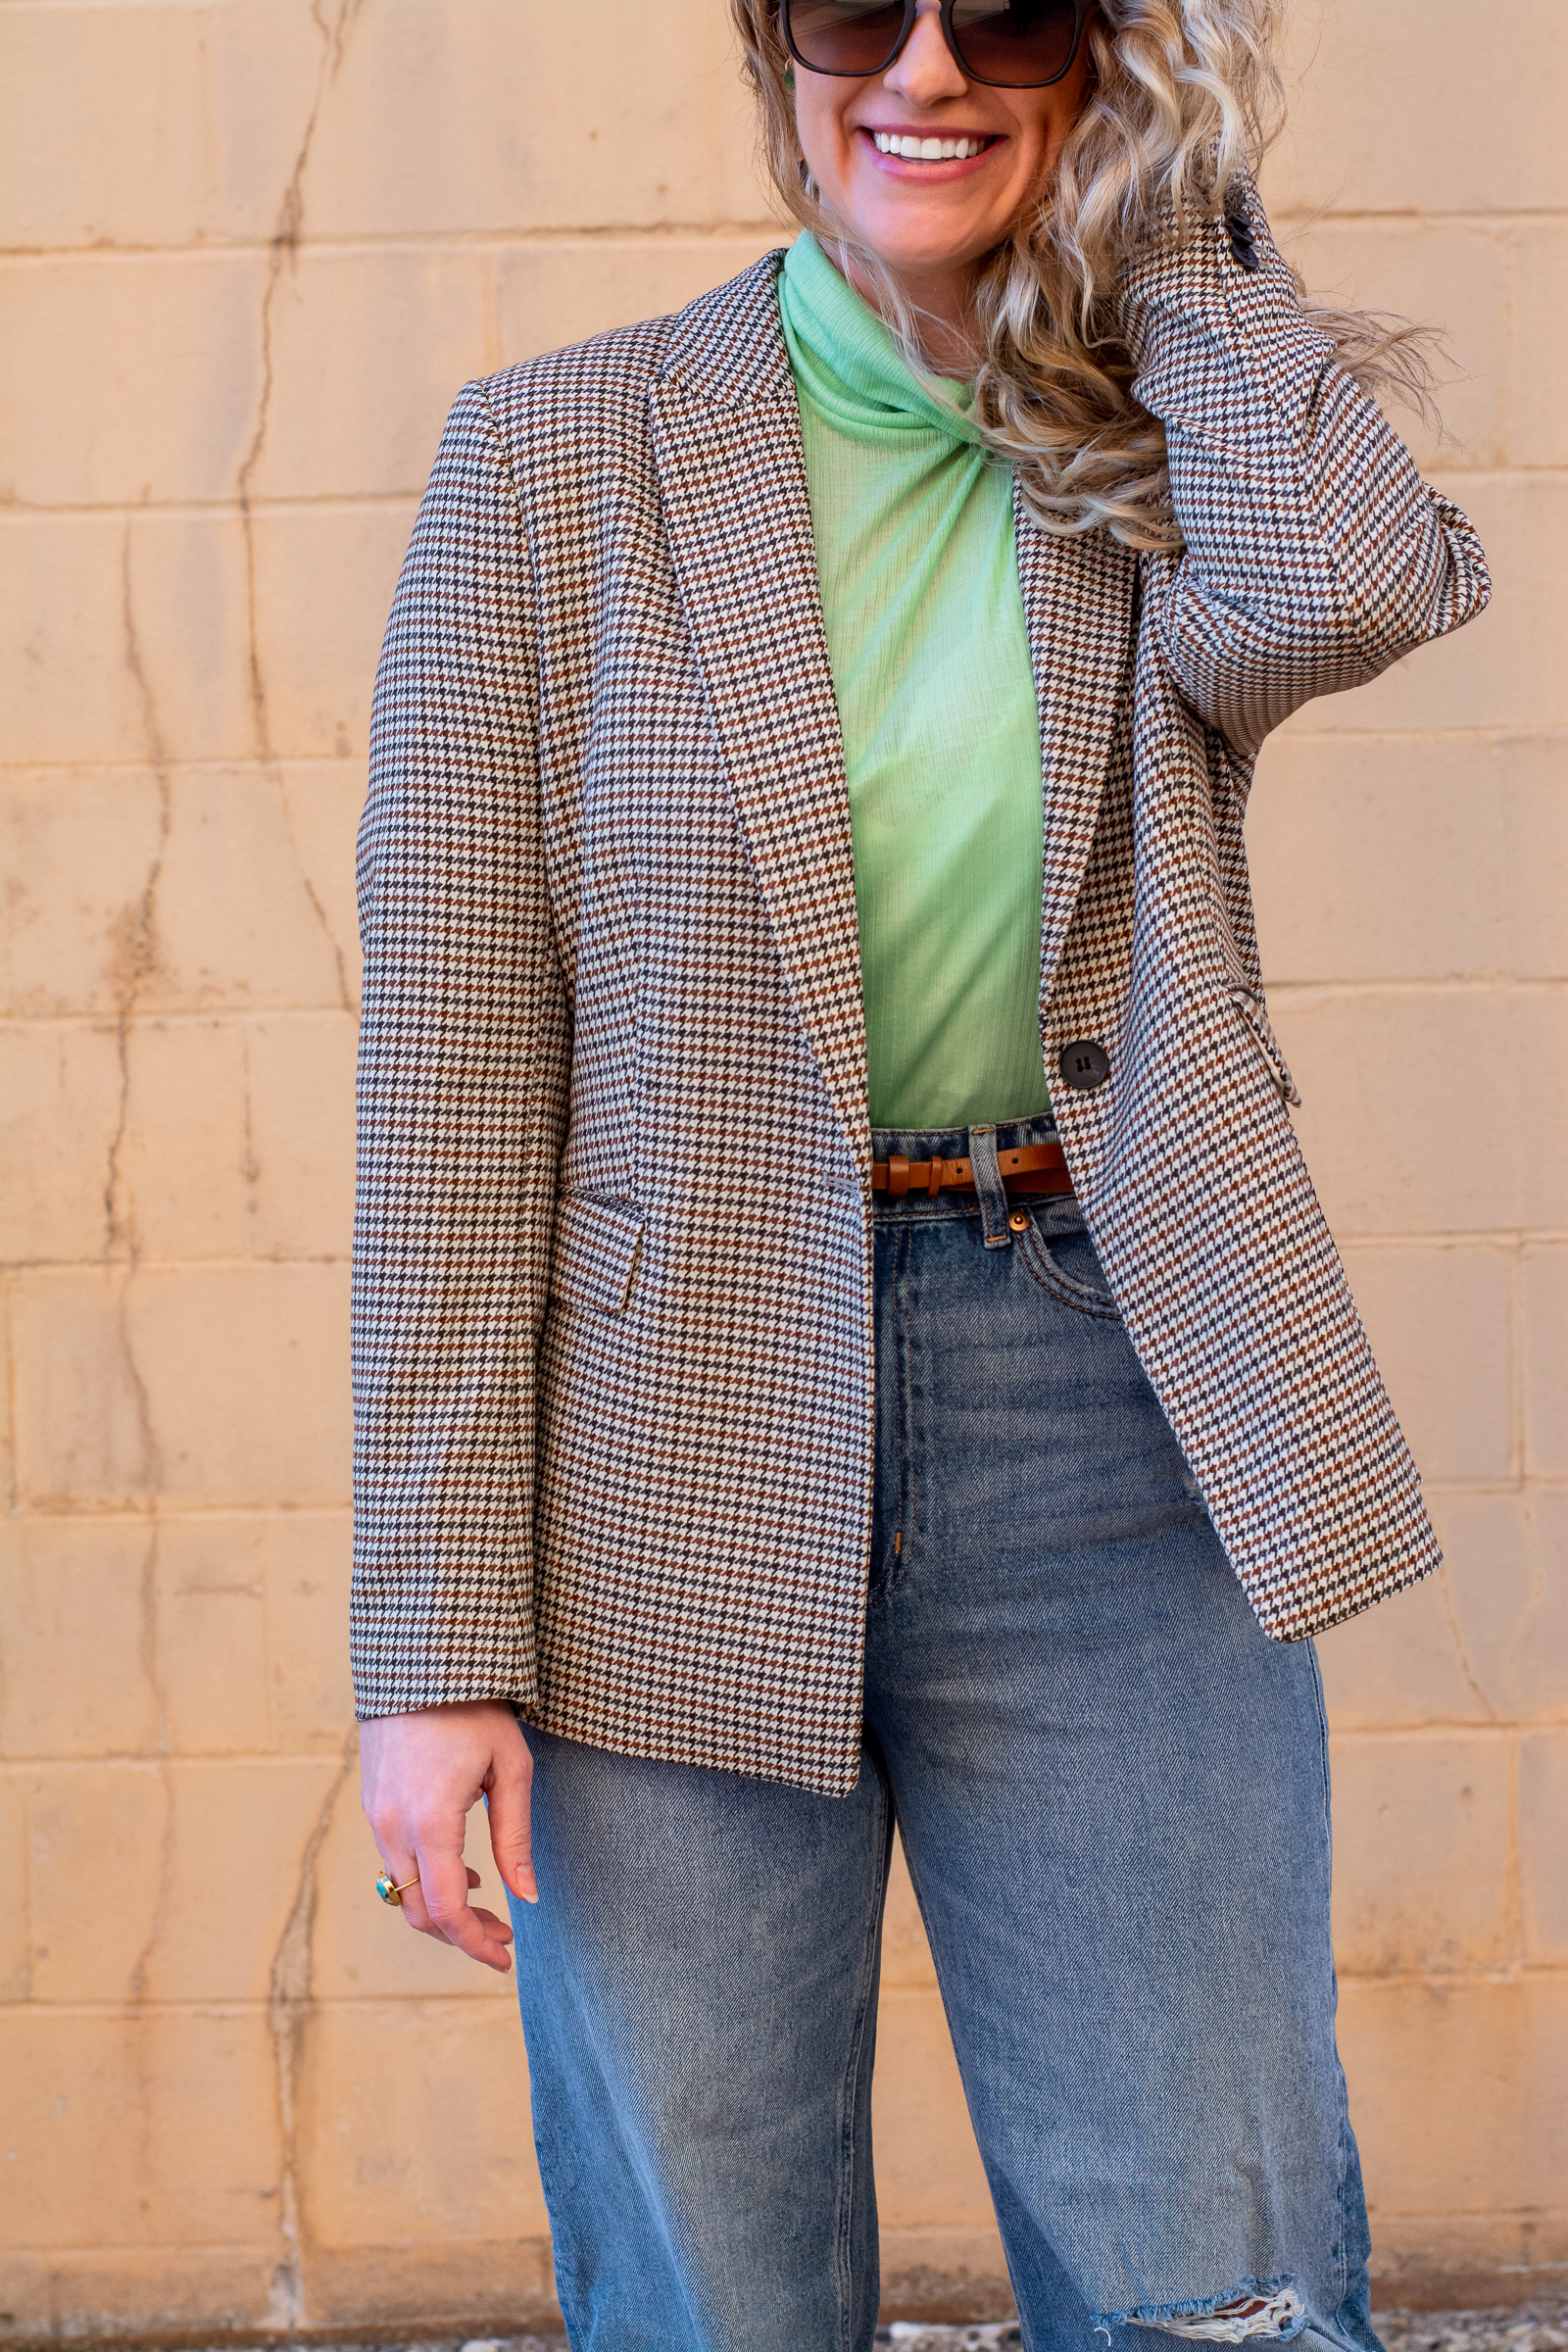 Spring Trend: Tennis Ball Green. How to Wear it Now. | LSR